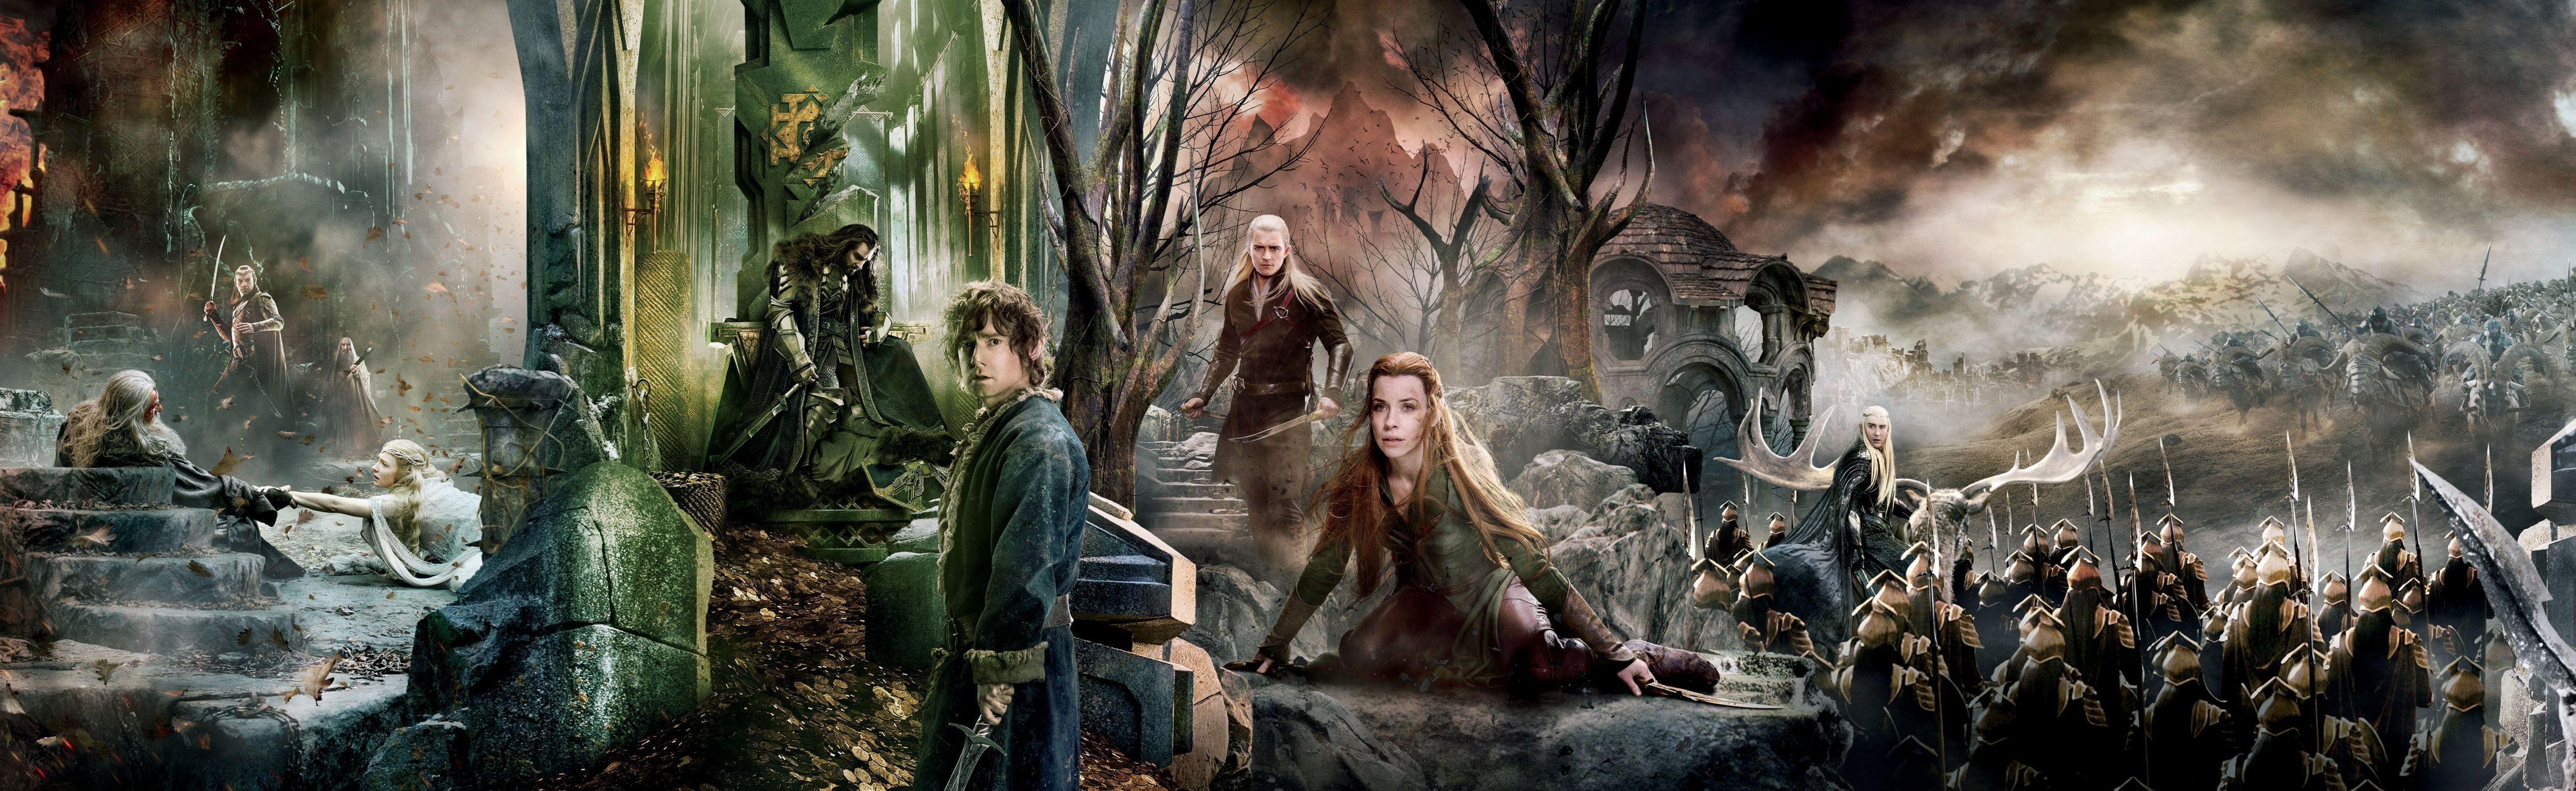 Wallpaper ID 421375  Movie The Hobbit The Battle of the Five Armies  Phone Wallpaper  828x1792 free download